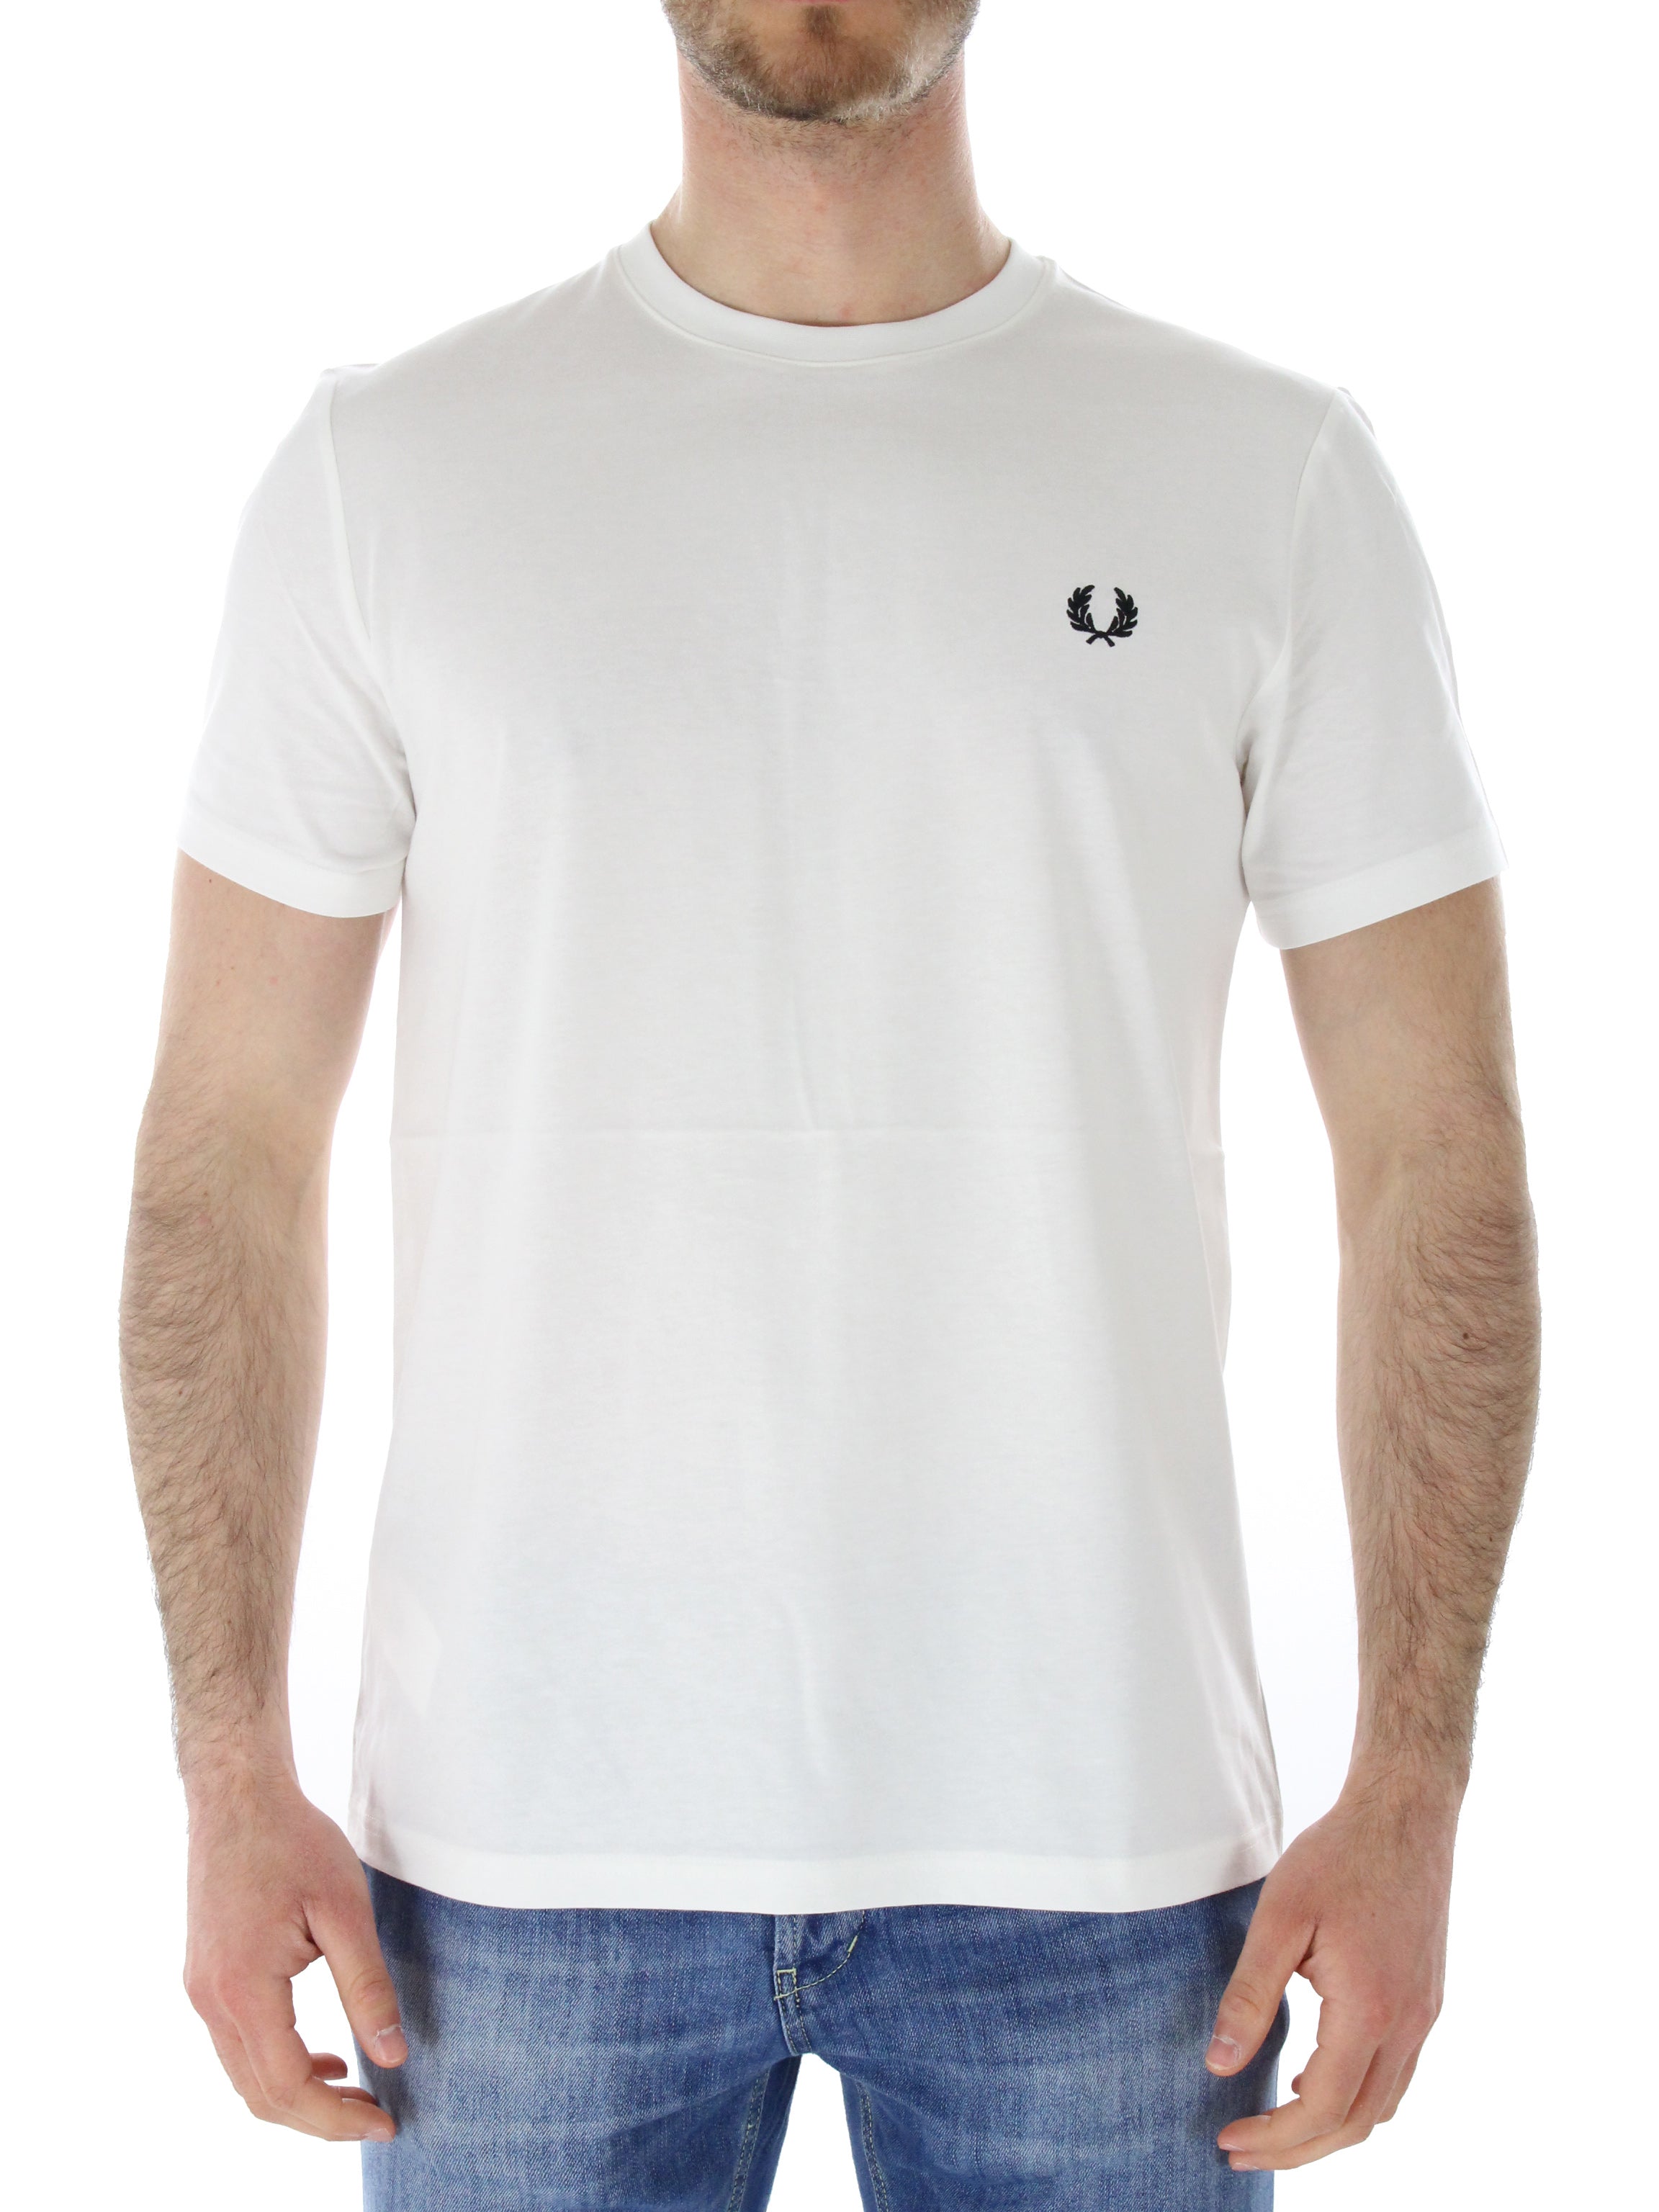 Fred perry t-shirt